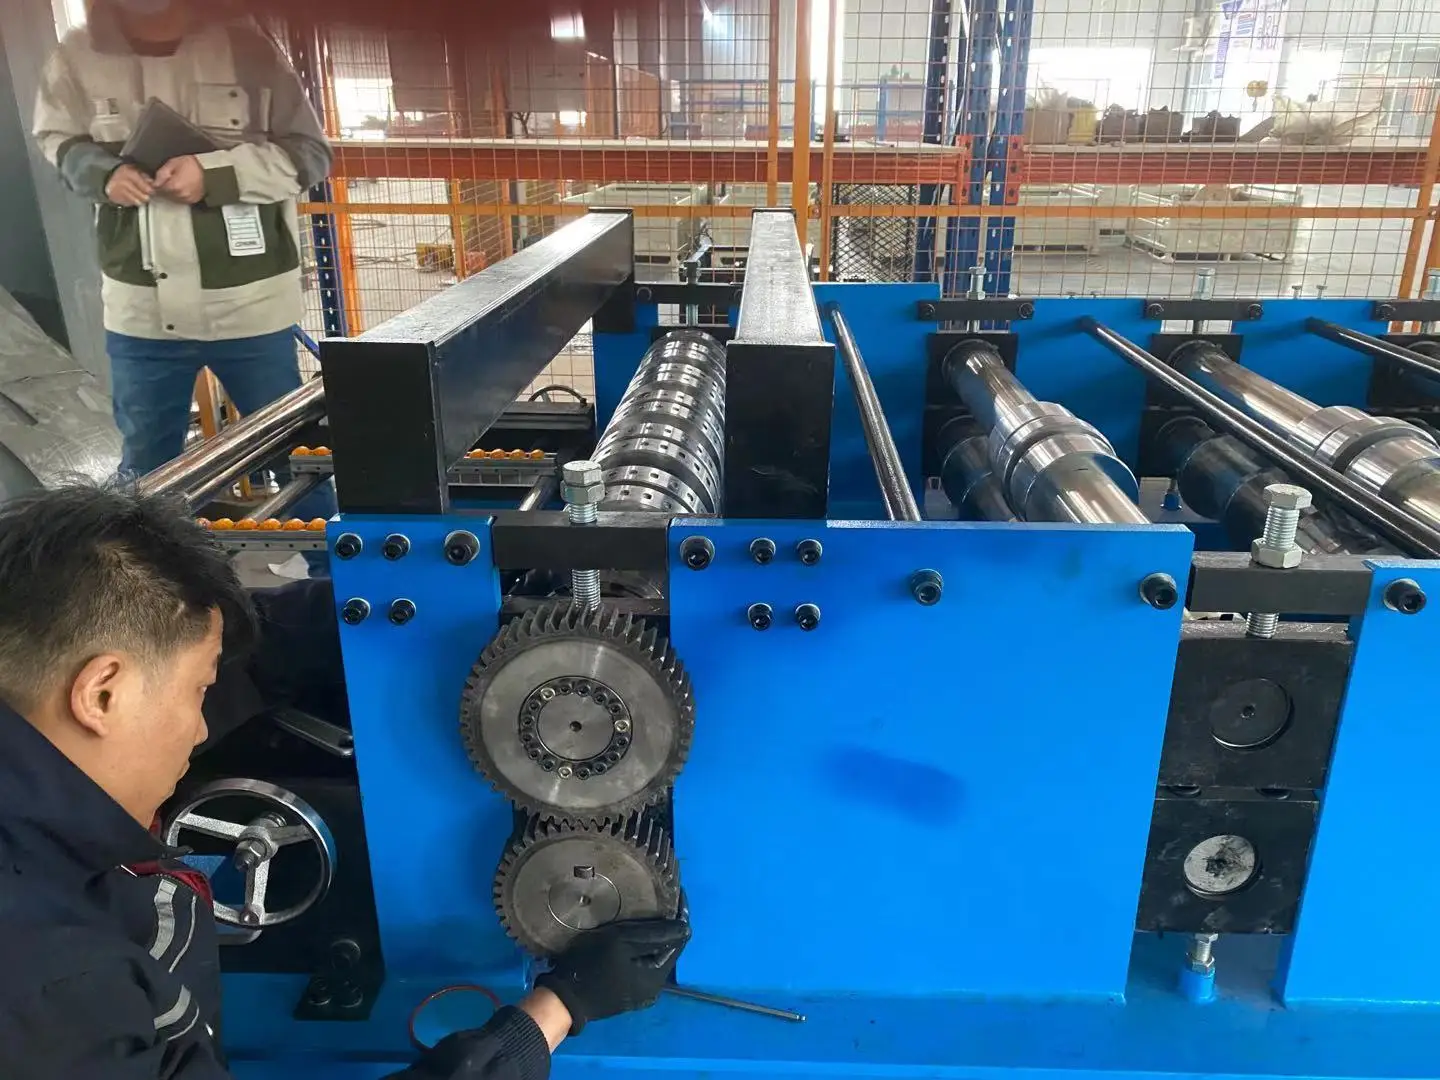 Automatic galvanized steel decking rolling forming machine manufacturer  